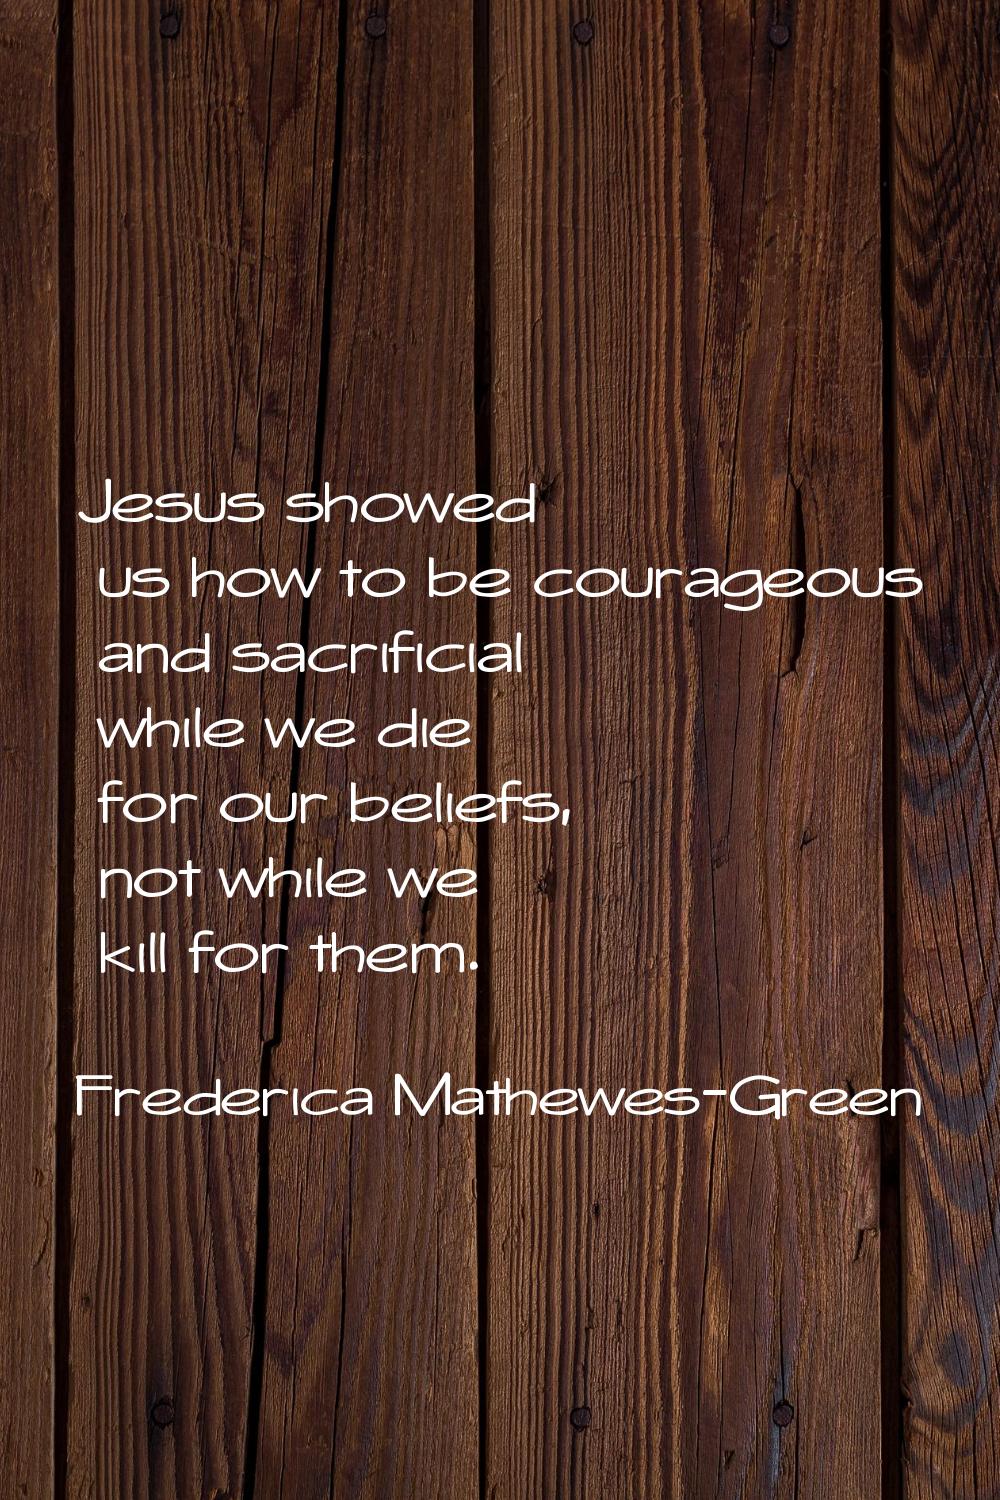 Jesus showed us how to be courageous and sacrificial while we die for our beliefs, not while we kil